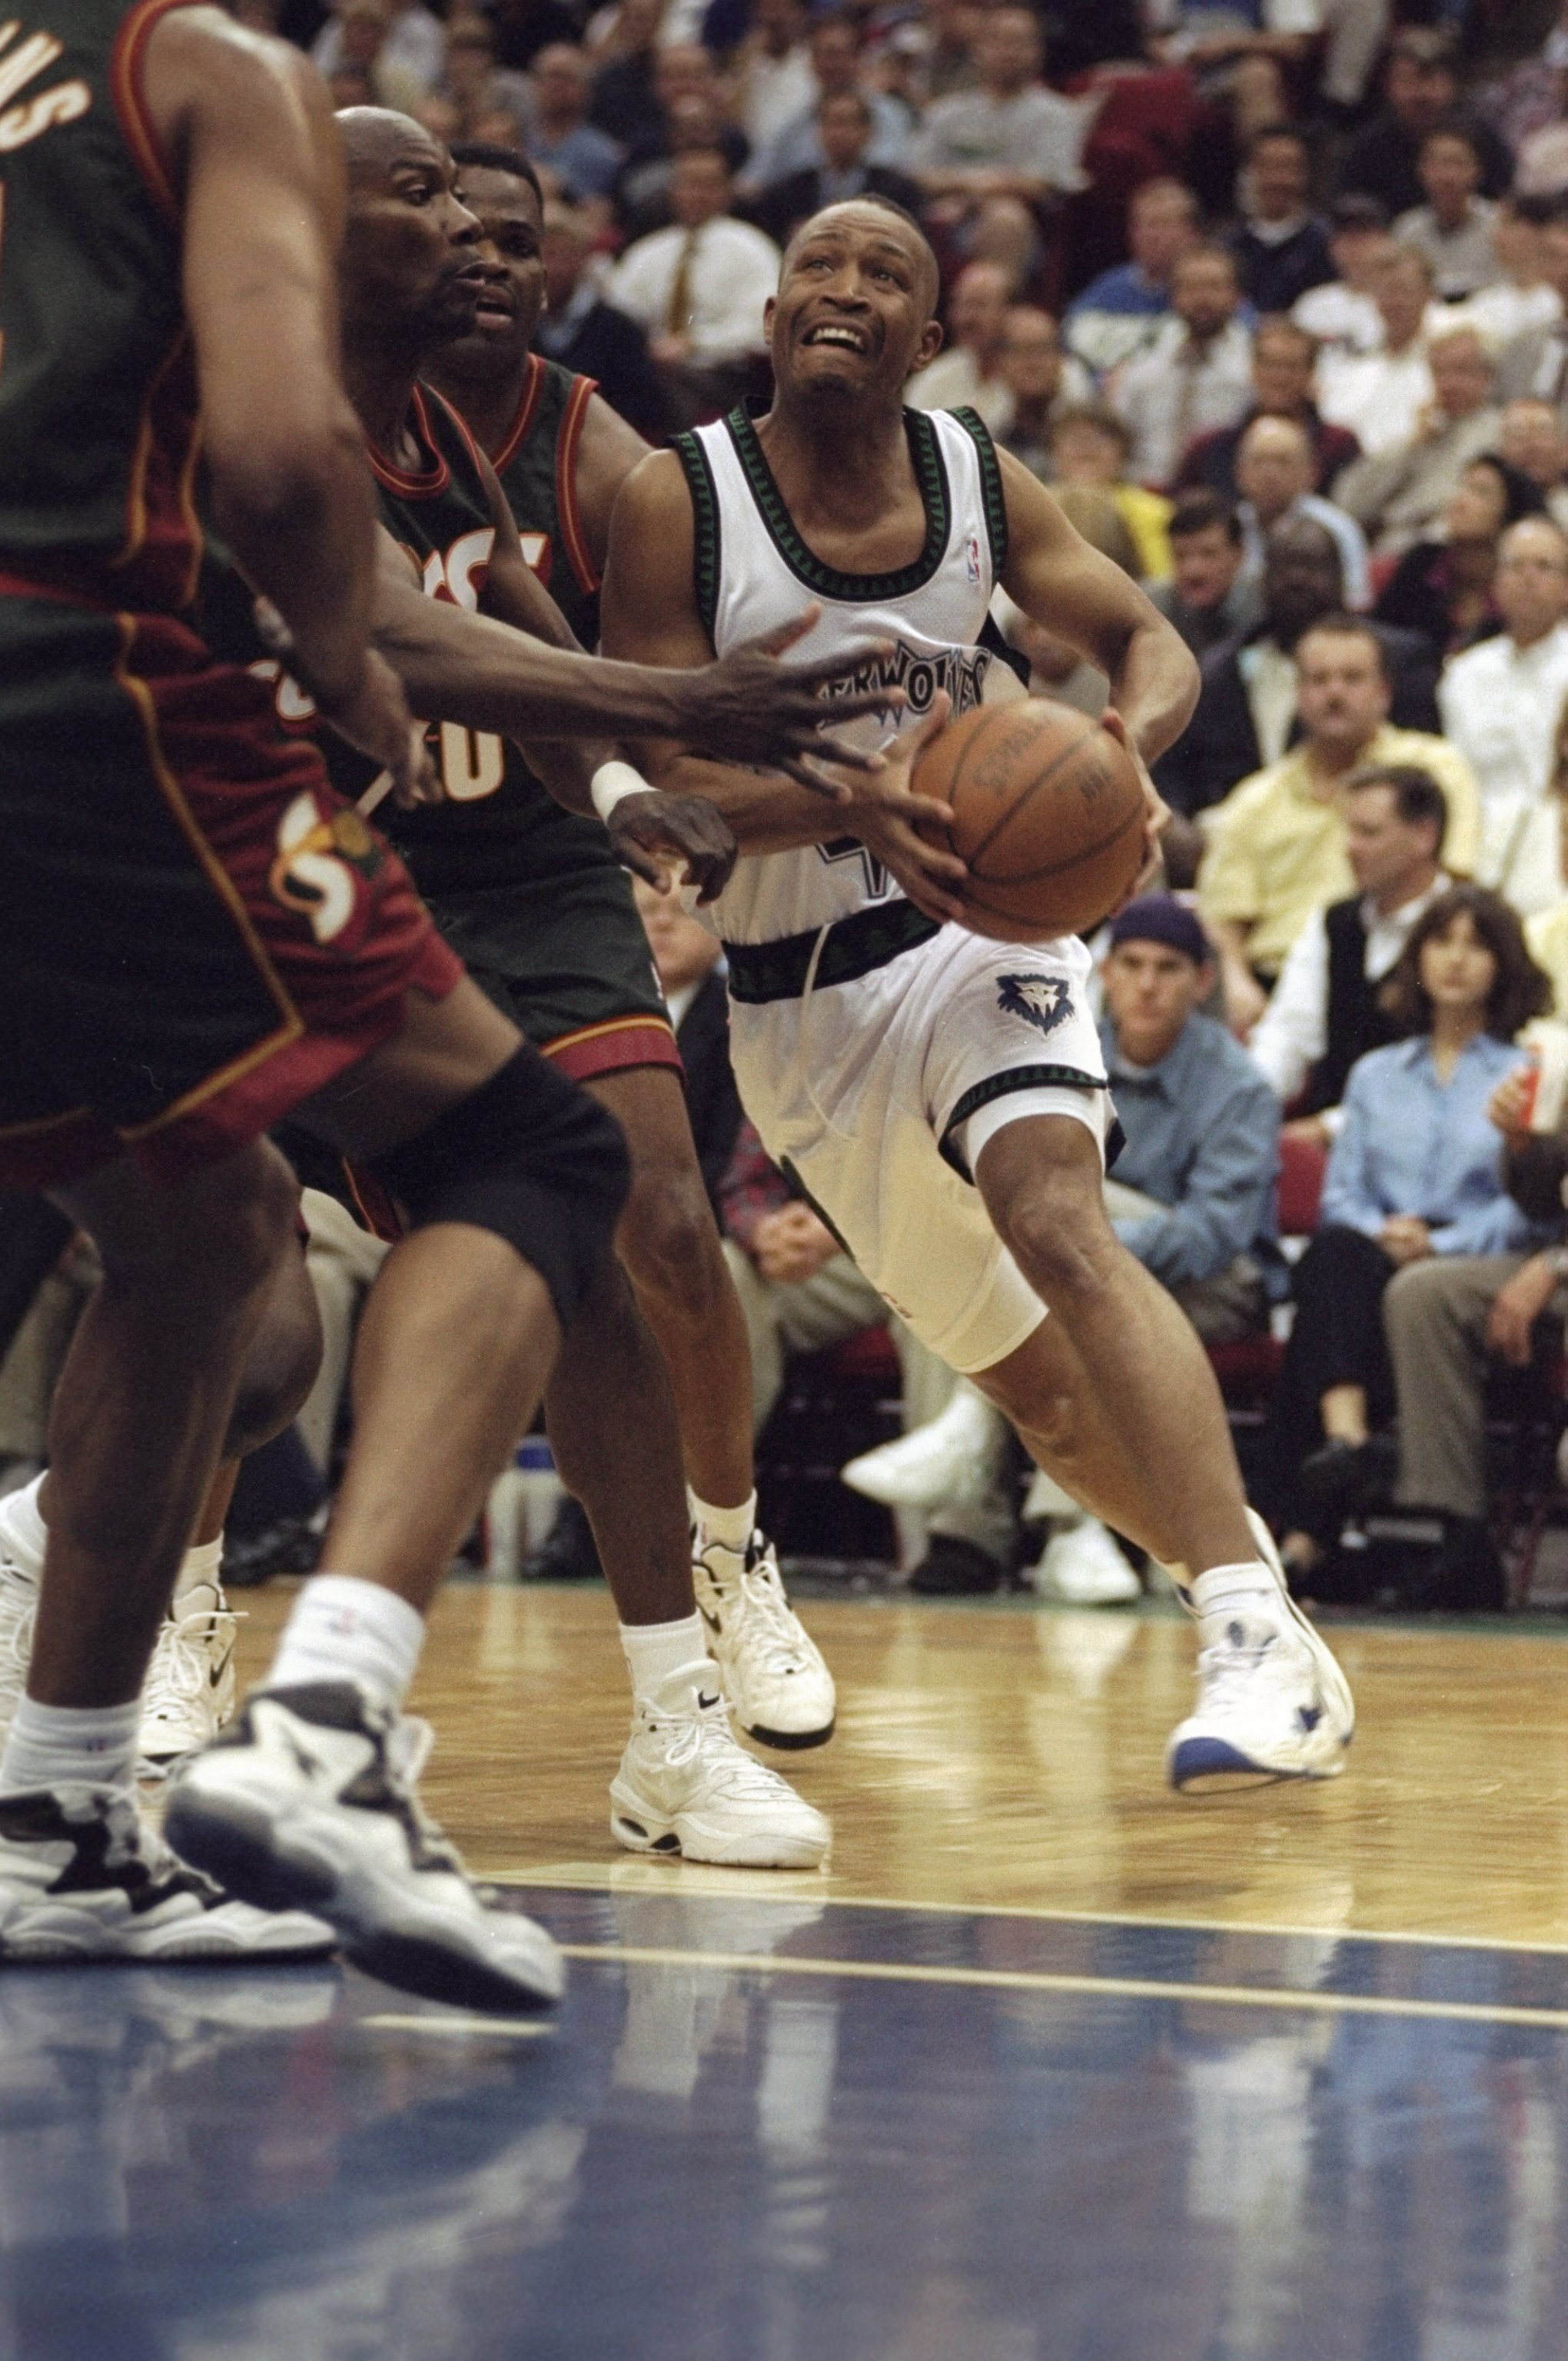 28 Apr 1998: Michael Williams of the Minneapolis Timberwolves in action against Dale Ellis of the Seattle Super Sonics during a game at the Target Center in Minneapolis, Minnesota. The Timberwolves defeated the Sonics 98-90.